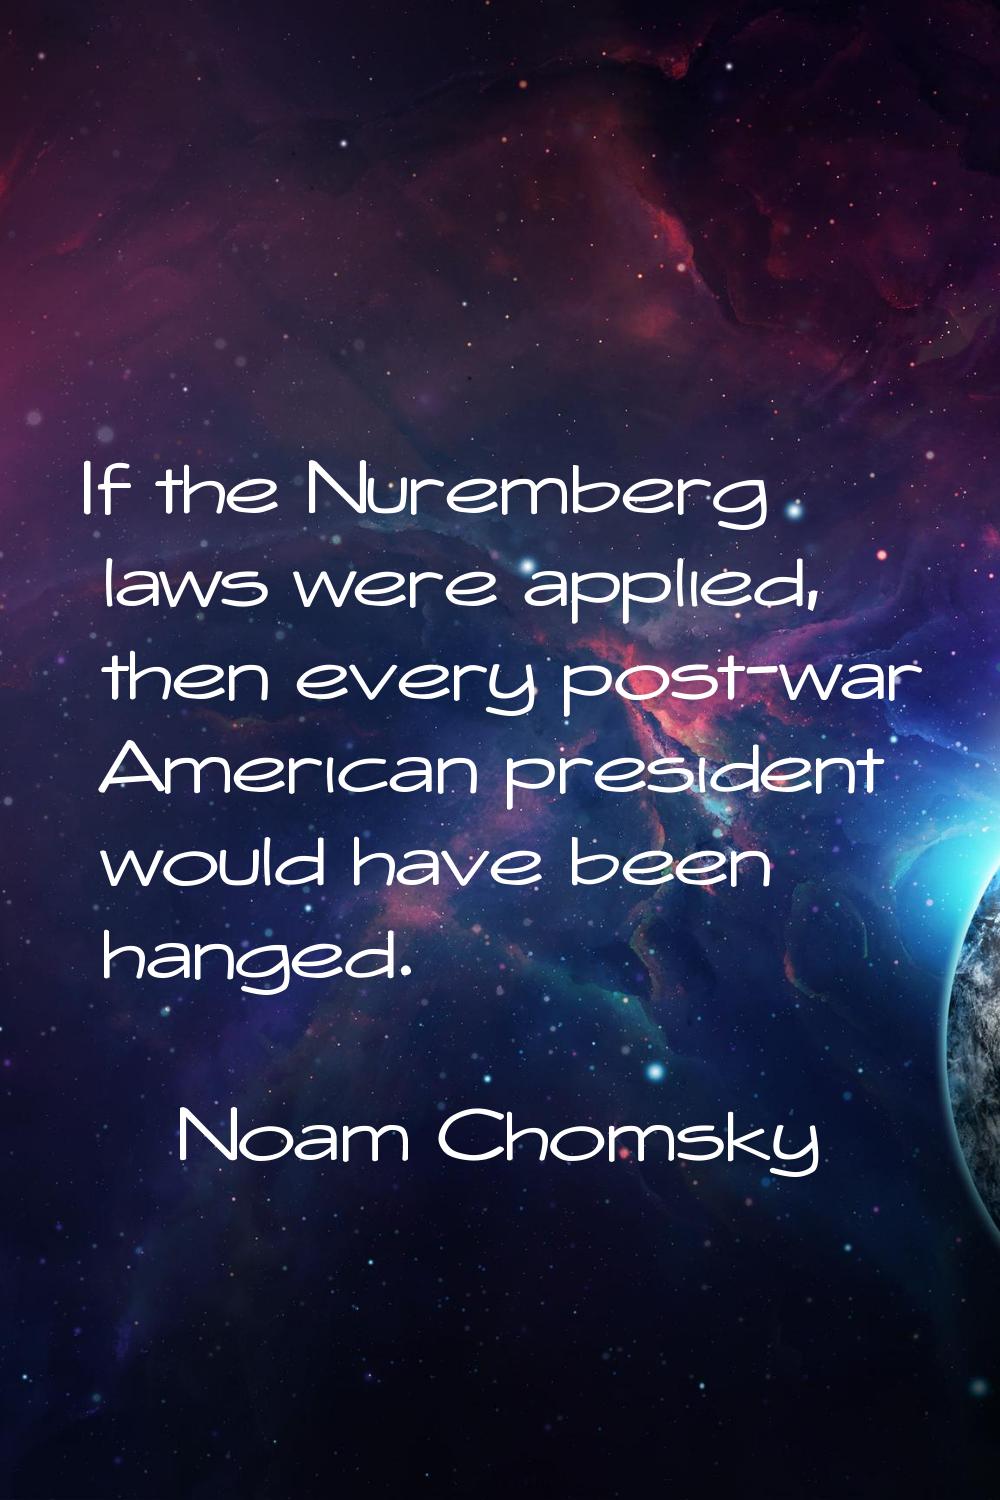 If the Nuremberg laws were applied, then every post-war American president would have been hanged.